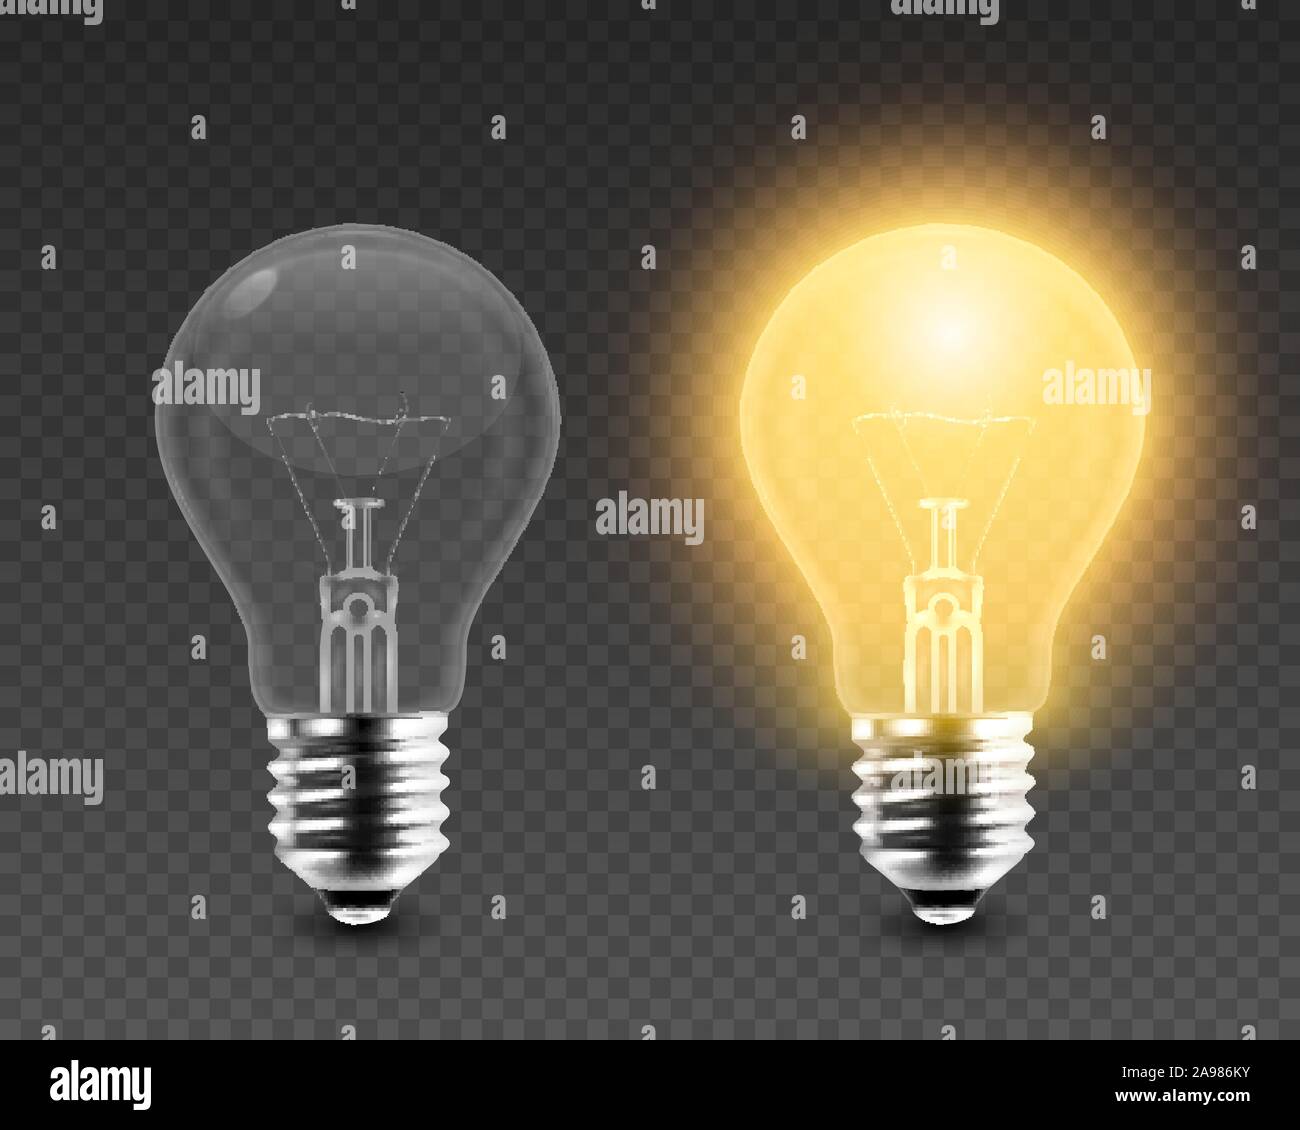 Vector 3d Realistic Turning On and Off Light Bulb Icon Set Closeup Isolated  on Transparent Background. Glowing Incandescent Filament Lamps. Creativity  Stock Vector Image & Art - Alamy